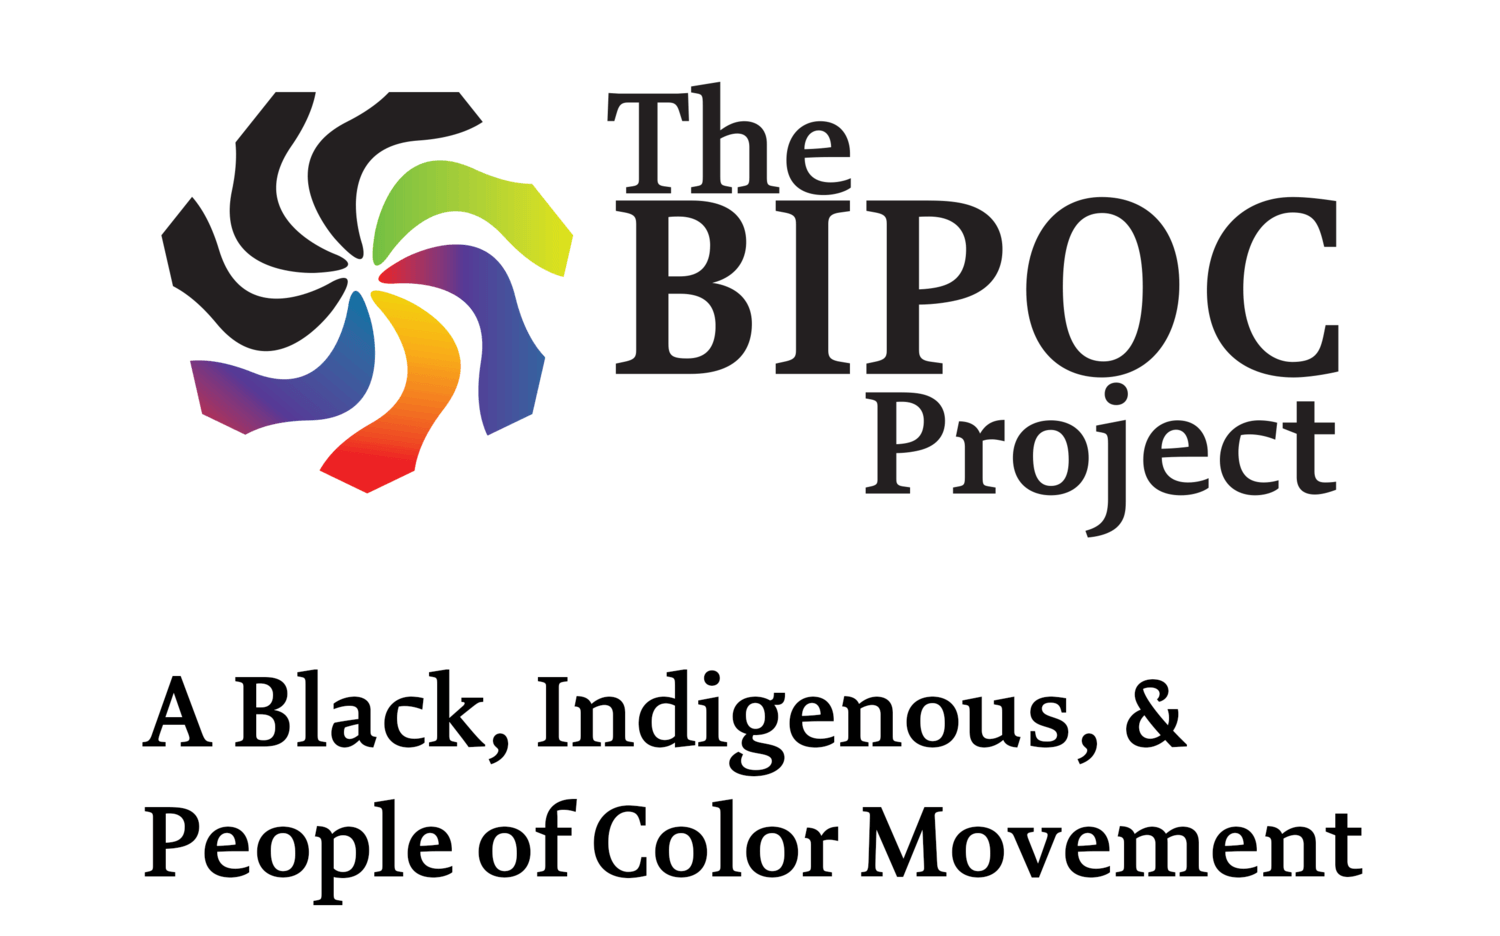 Member of The Black Indigenous and People of Color Project